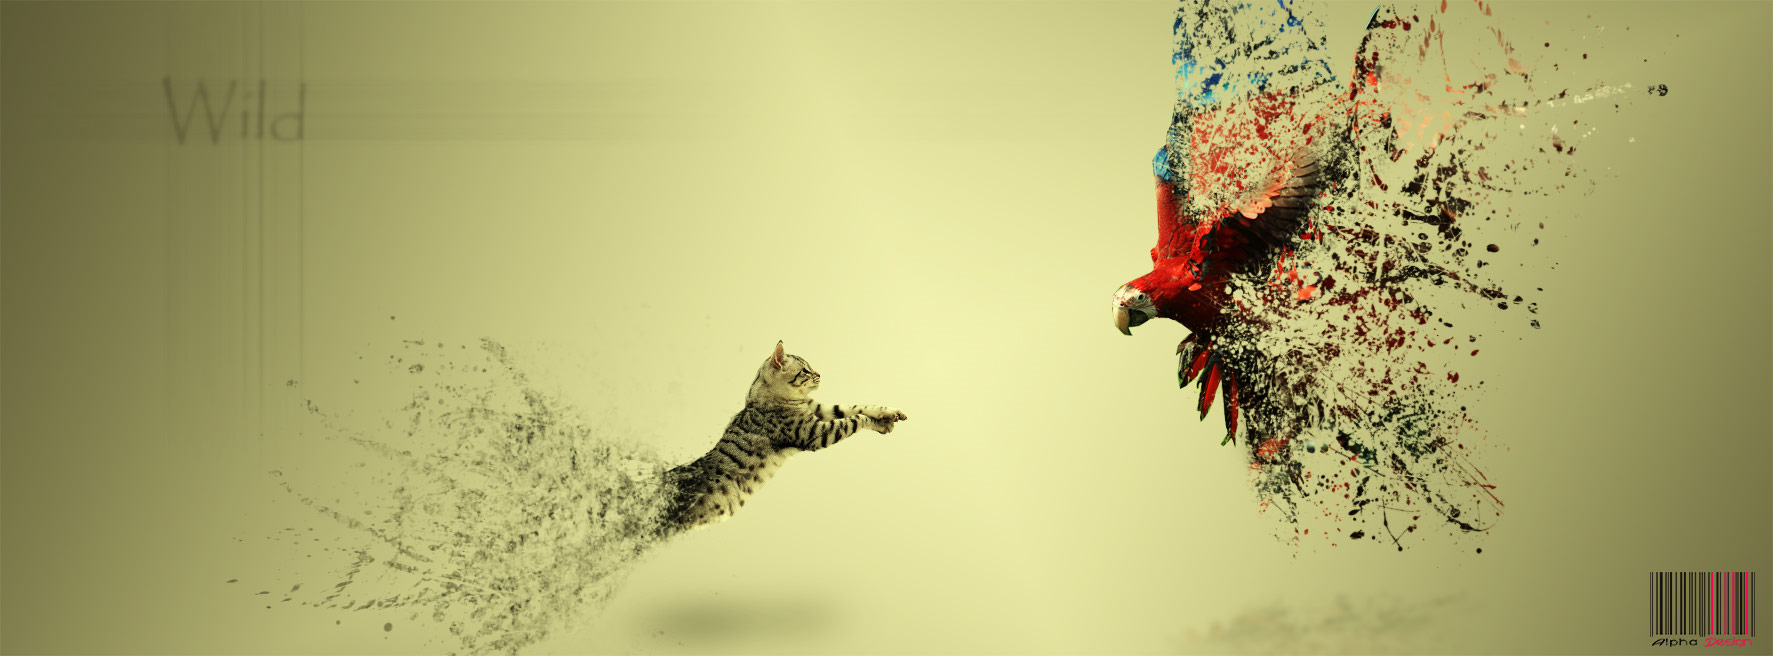 abstract facebook cover image